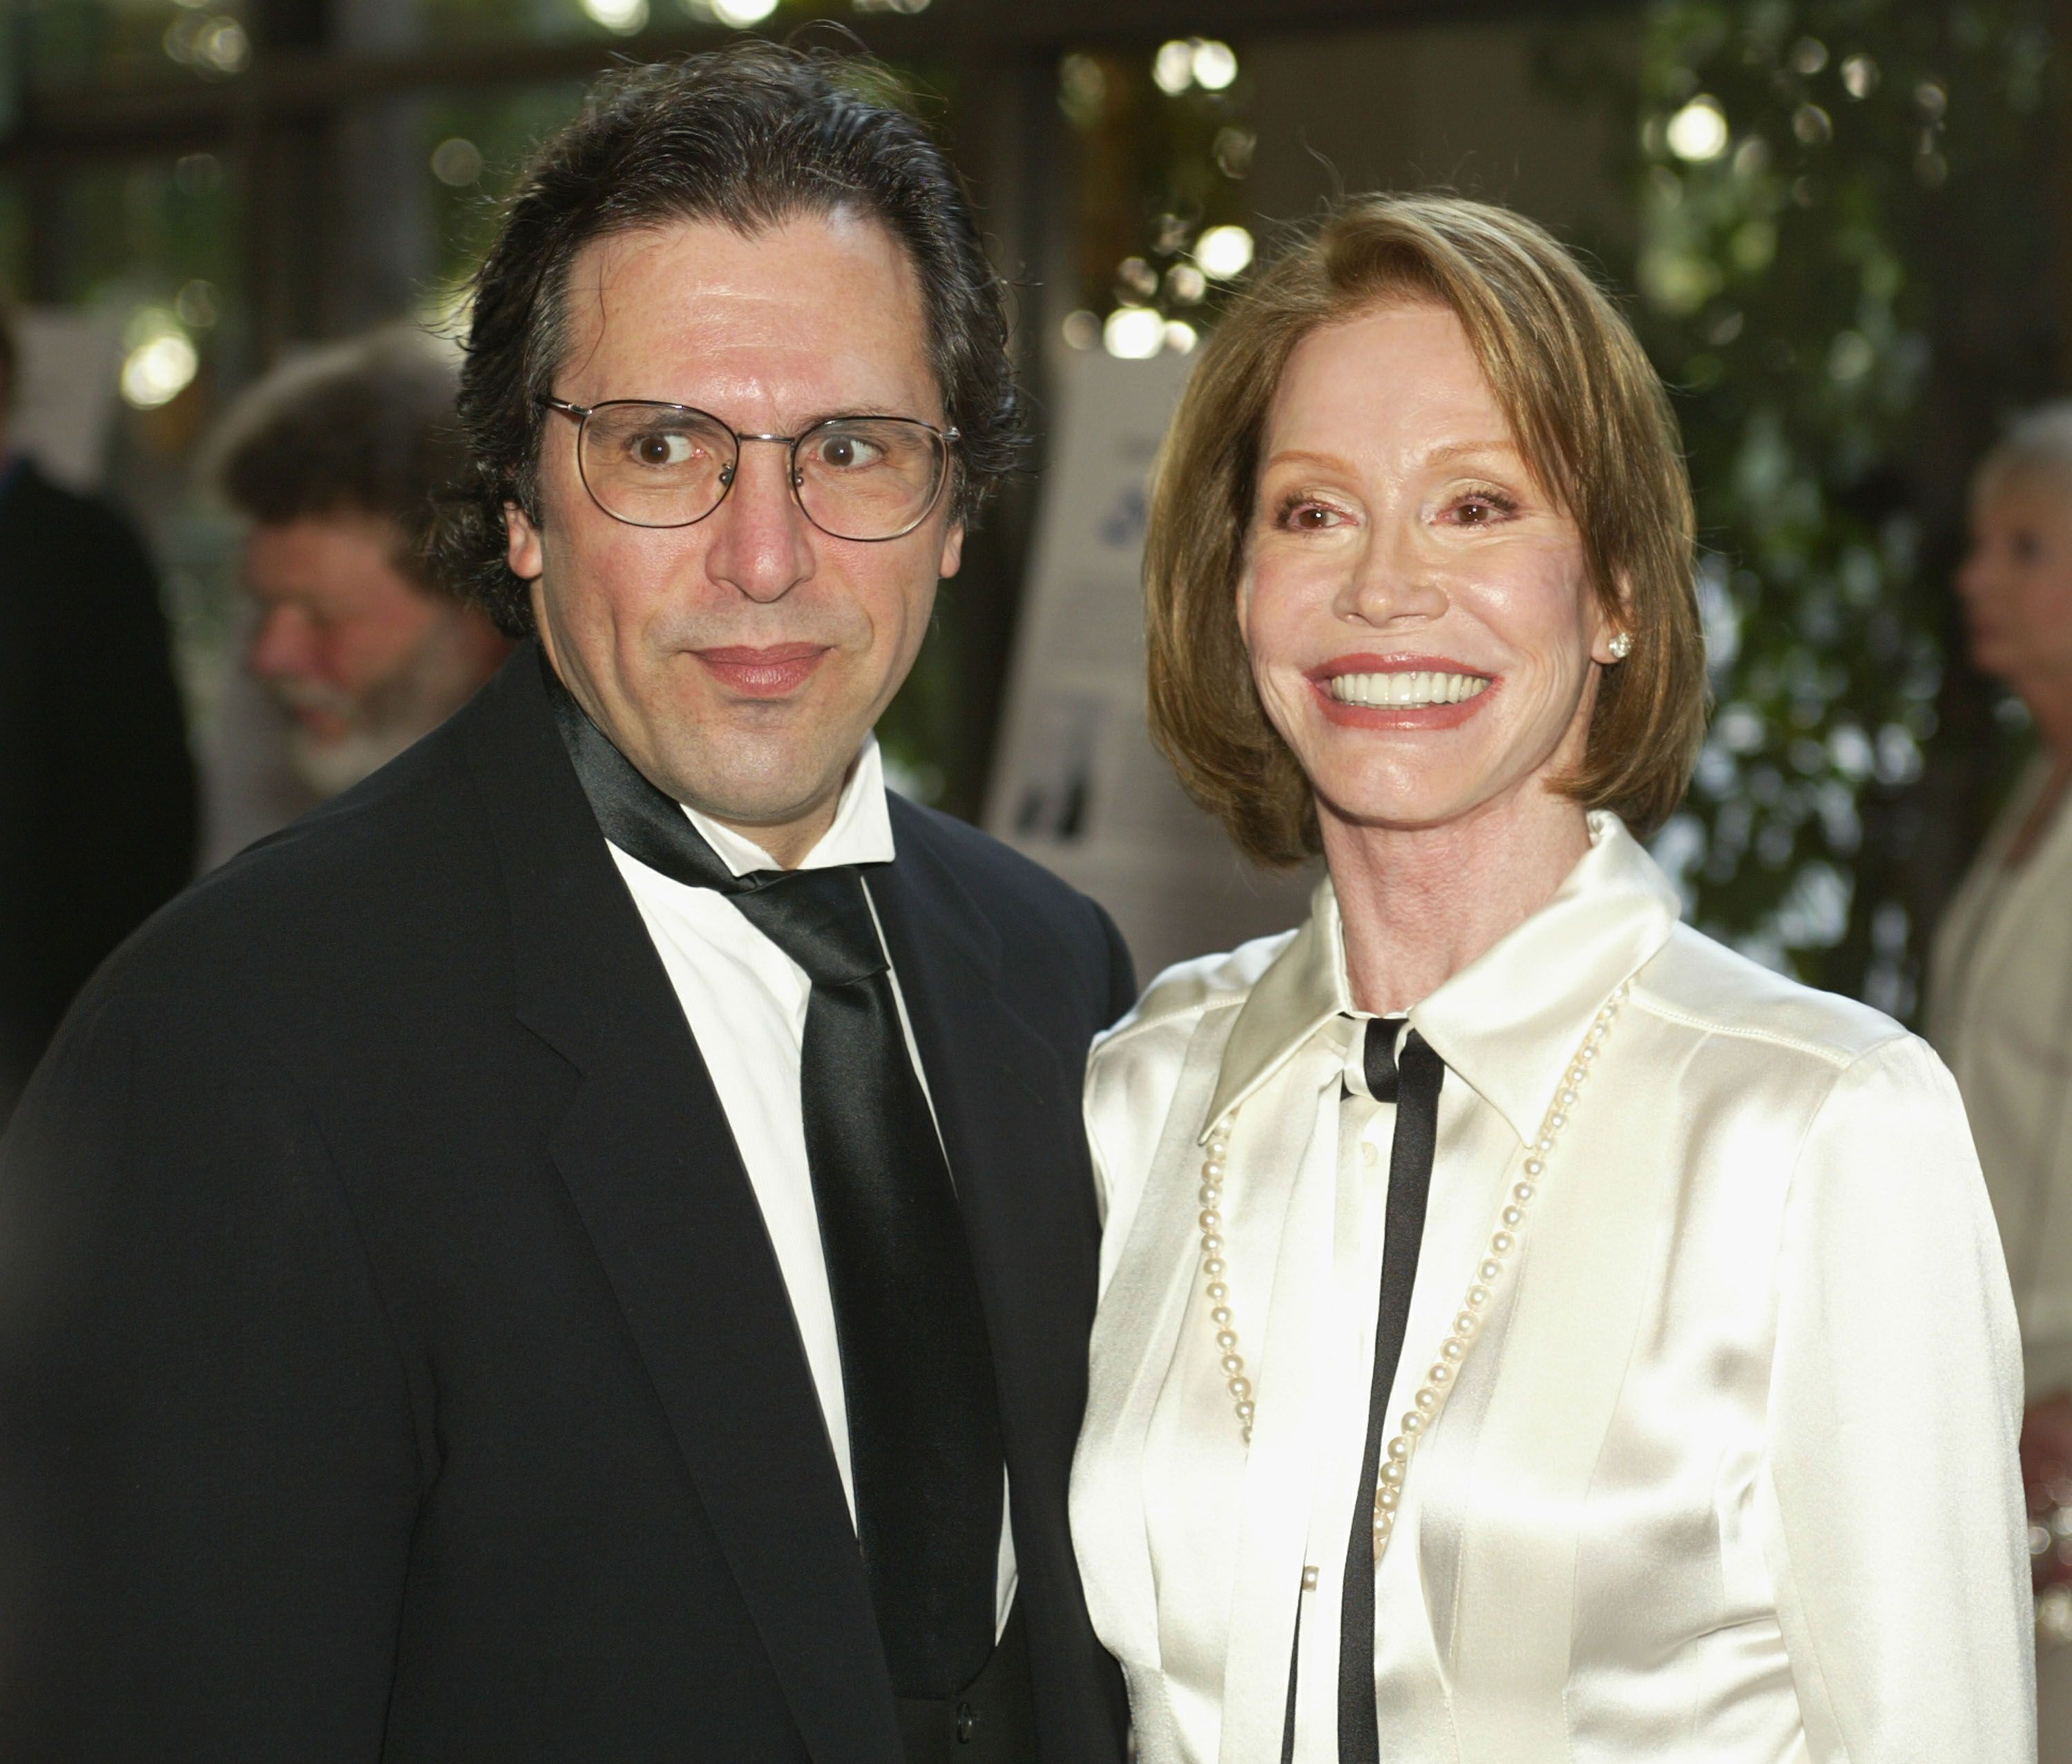 Dr. Robert Levine and Mary Tyler Moore at the American Screenwriters Associations' "Screenwriting Hall of Fame Awards" in Los Angeles, California on August 3, 2002 | Photo: Kevin Winter/ImageDirect/Getty Images